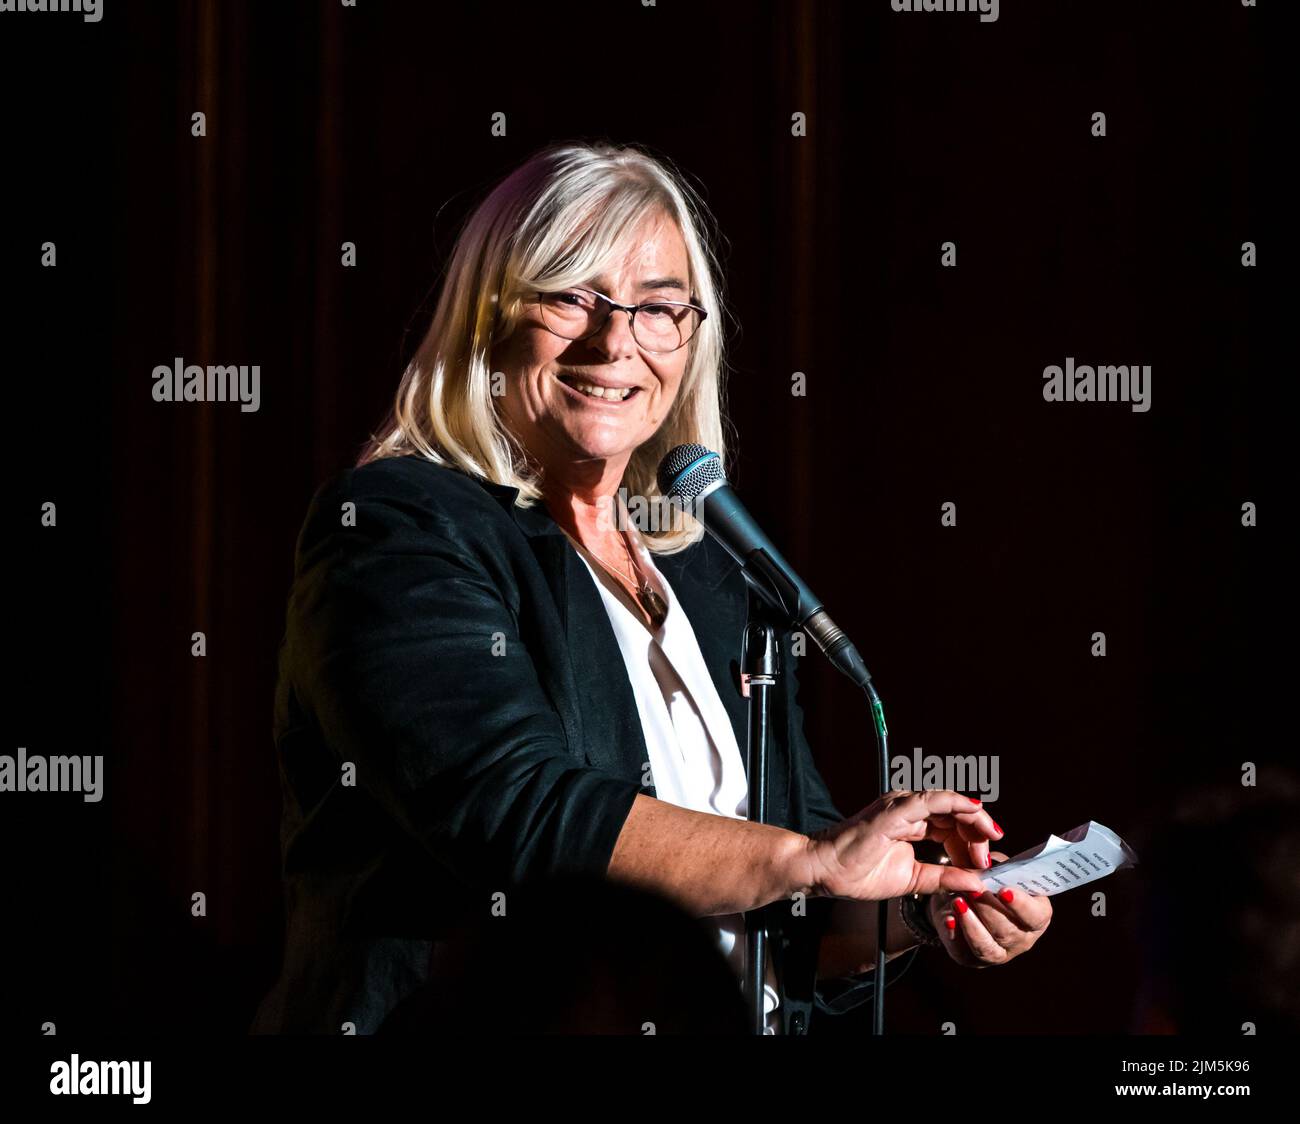 Edinburgh, Scotland, United Kingdom, 4th August 2022. Edinburgh Festival Fringe: The Stand Comedy Club presents a showcase of the comedic talent on offer at this year's Fringe at the New Town Theatre. Pictured: Susan Morrison who acted as compere. Credit: Sally Anderson/Alamy Live News Stock Photo